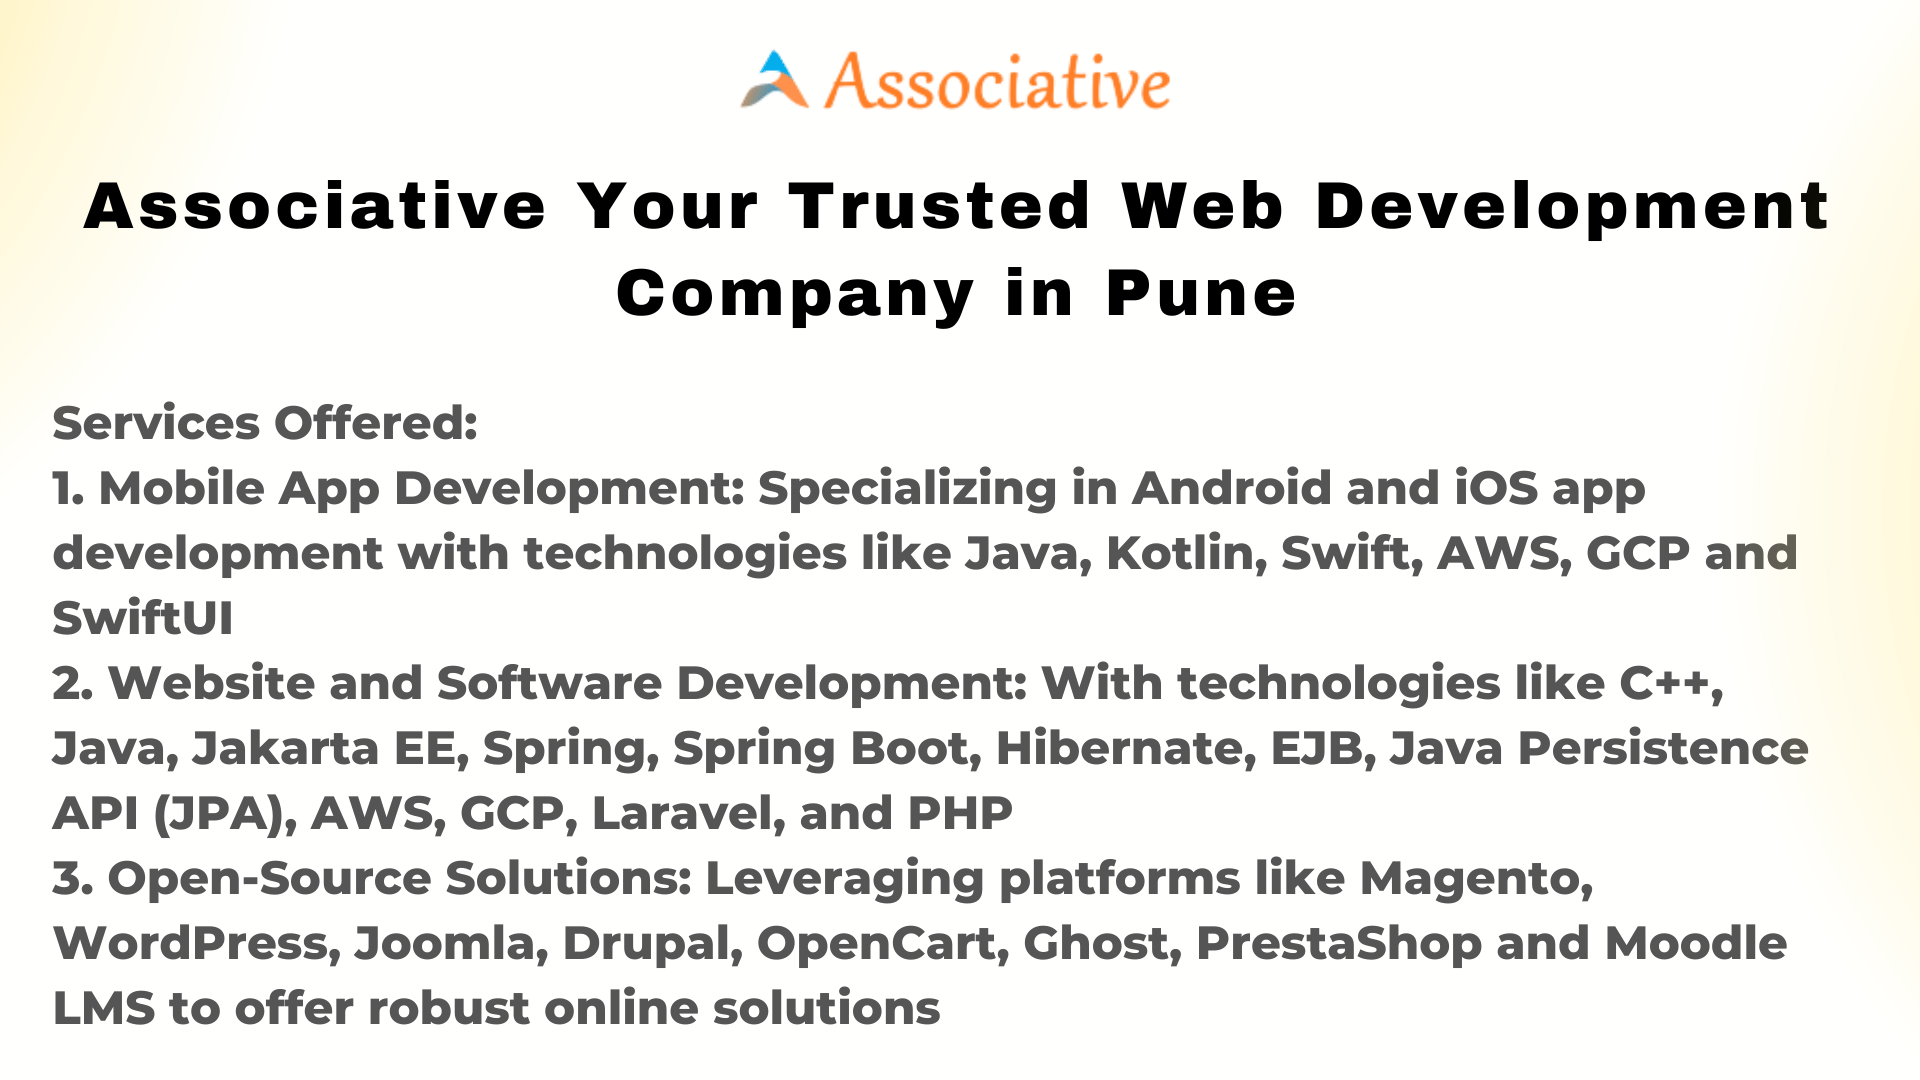 Associative Your Trusted Web Development Company in Pune